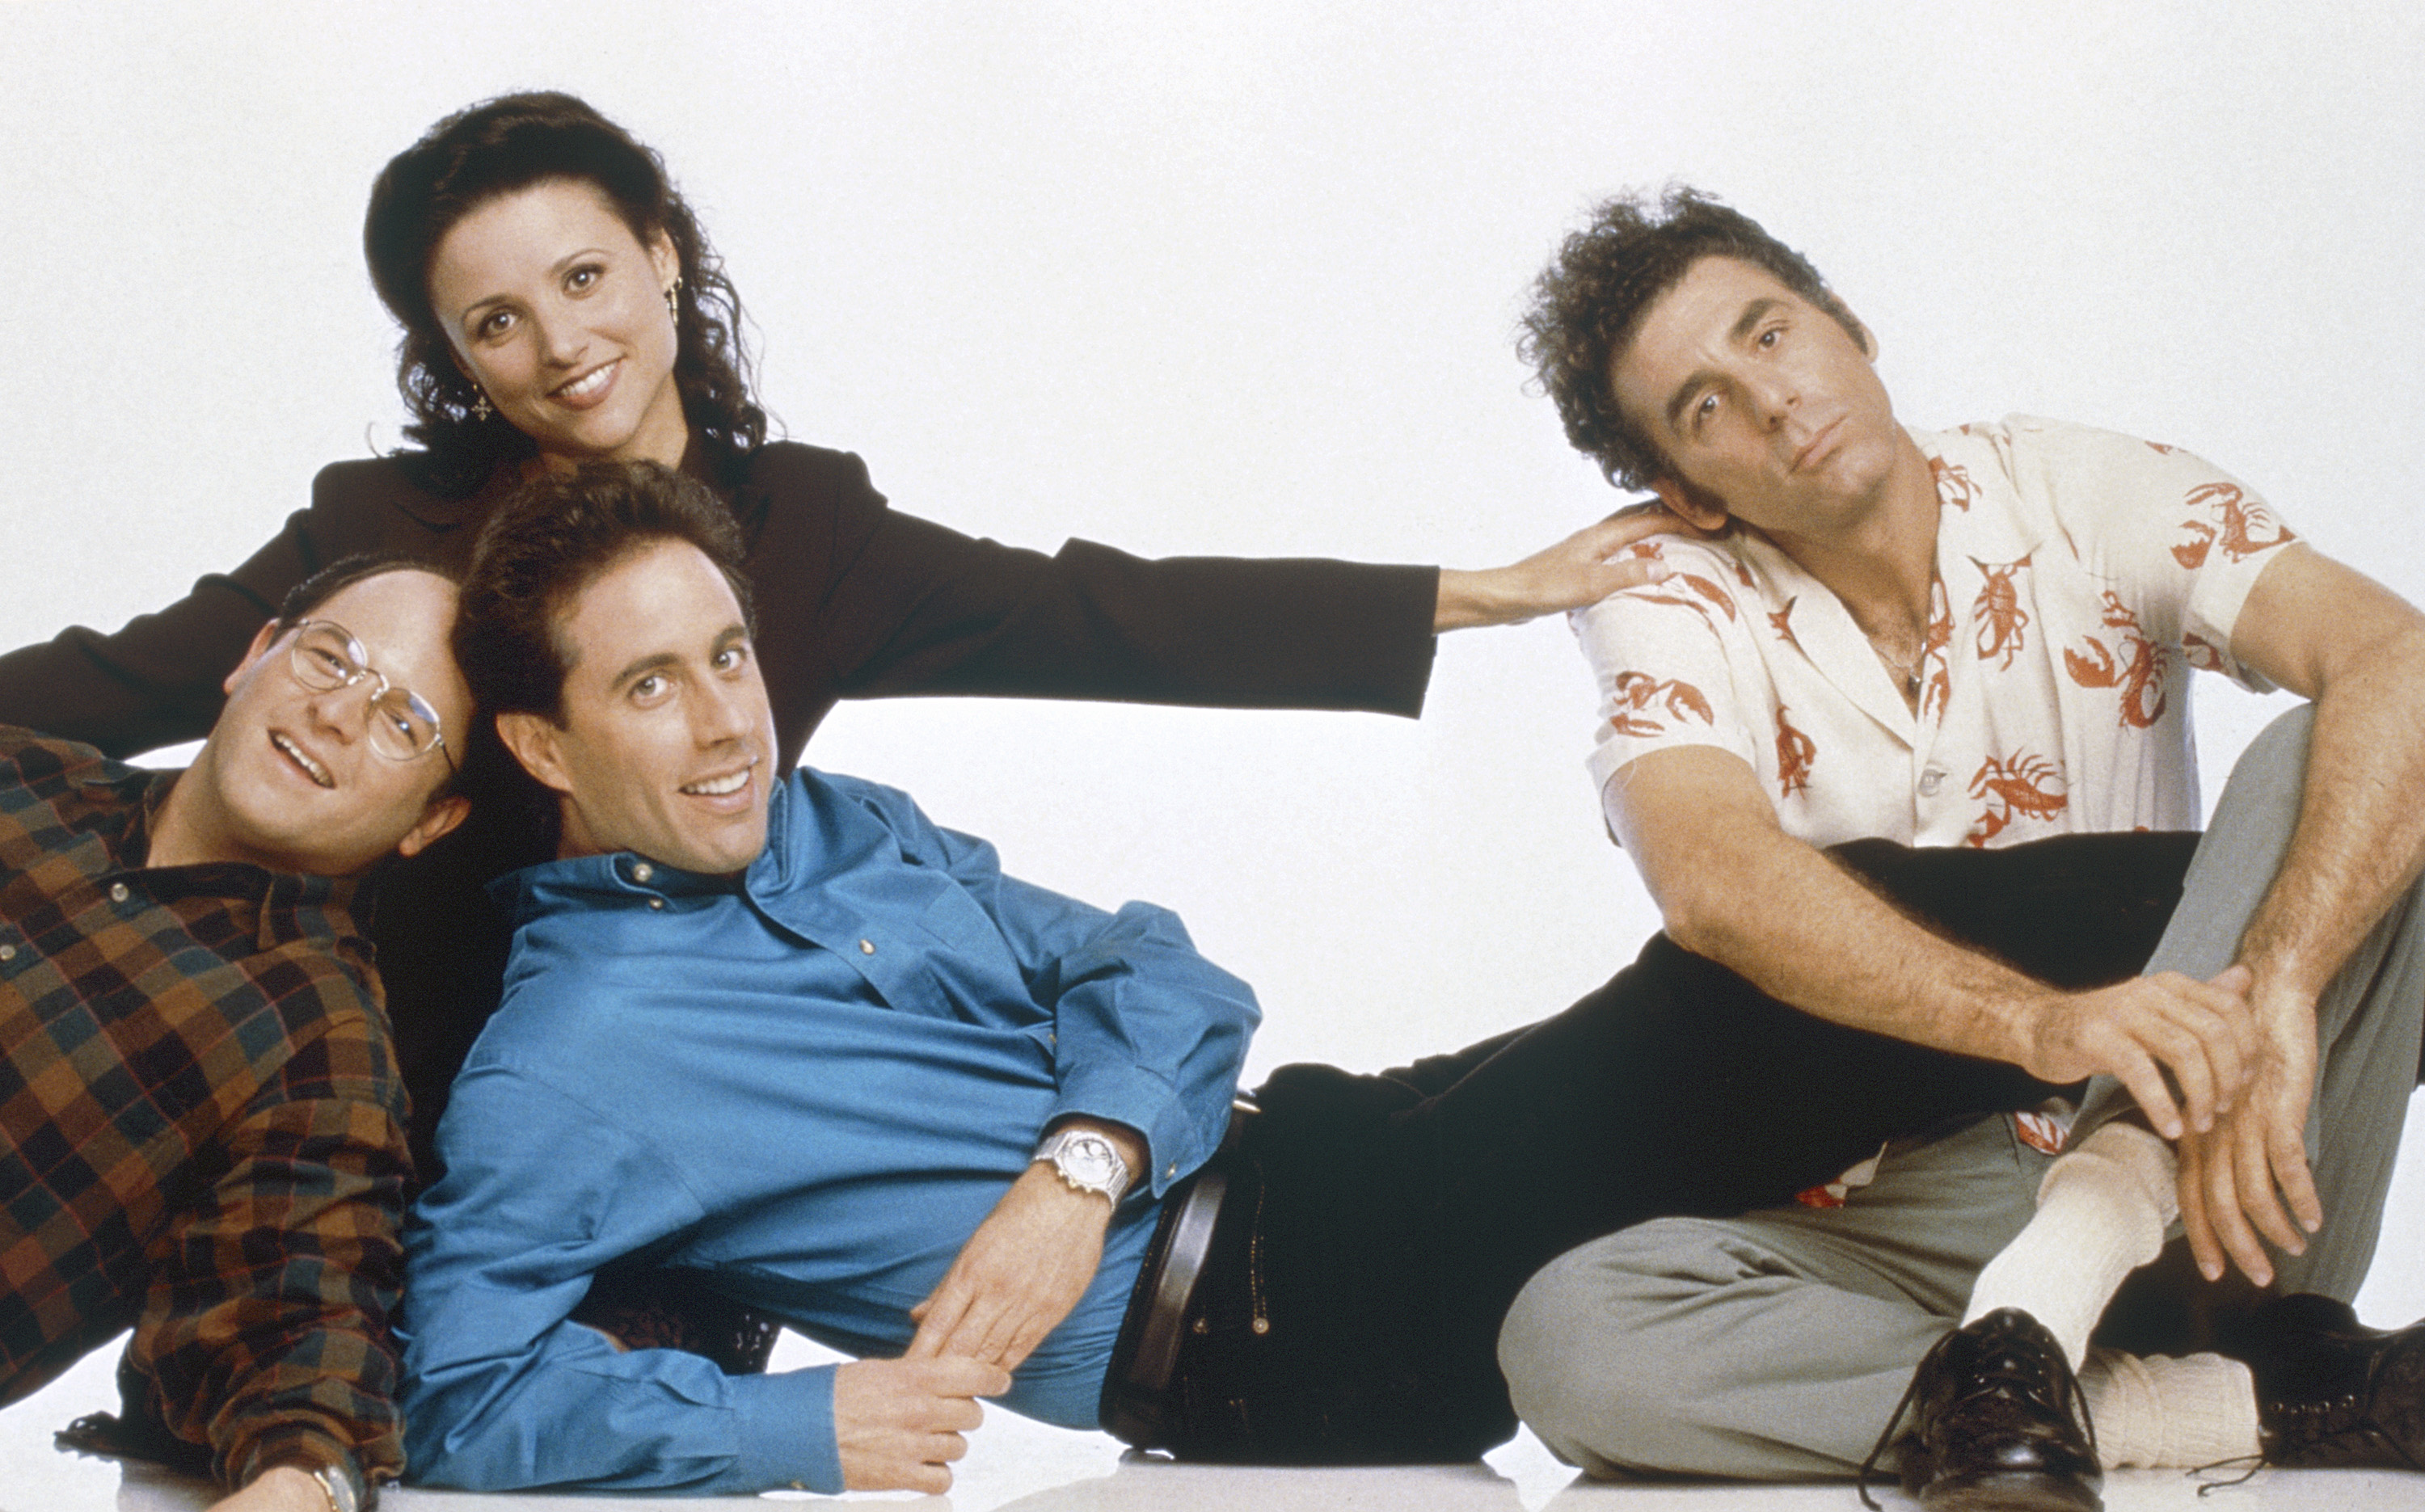 Jason Alexander as George Costanza, Julia Louis-Dreyfus as Elaine Benes, Jerry Seinfeld as Jerry Seinfeld and Michael Richards as Cosmo Kramer (George Lange—NBC/Getty Images)